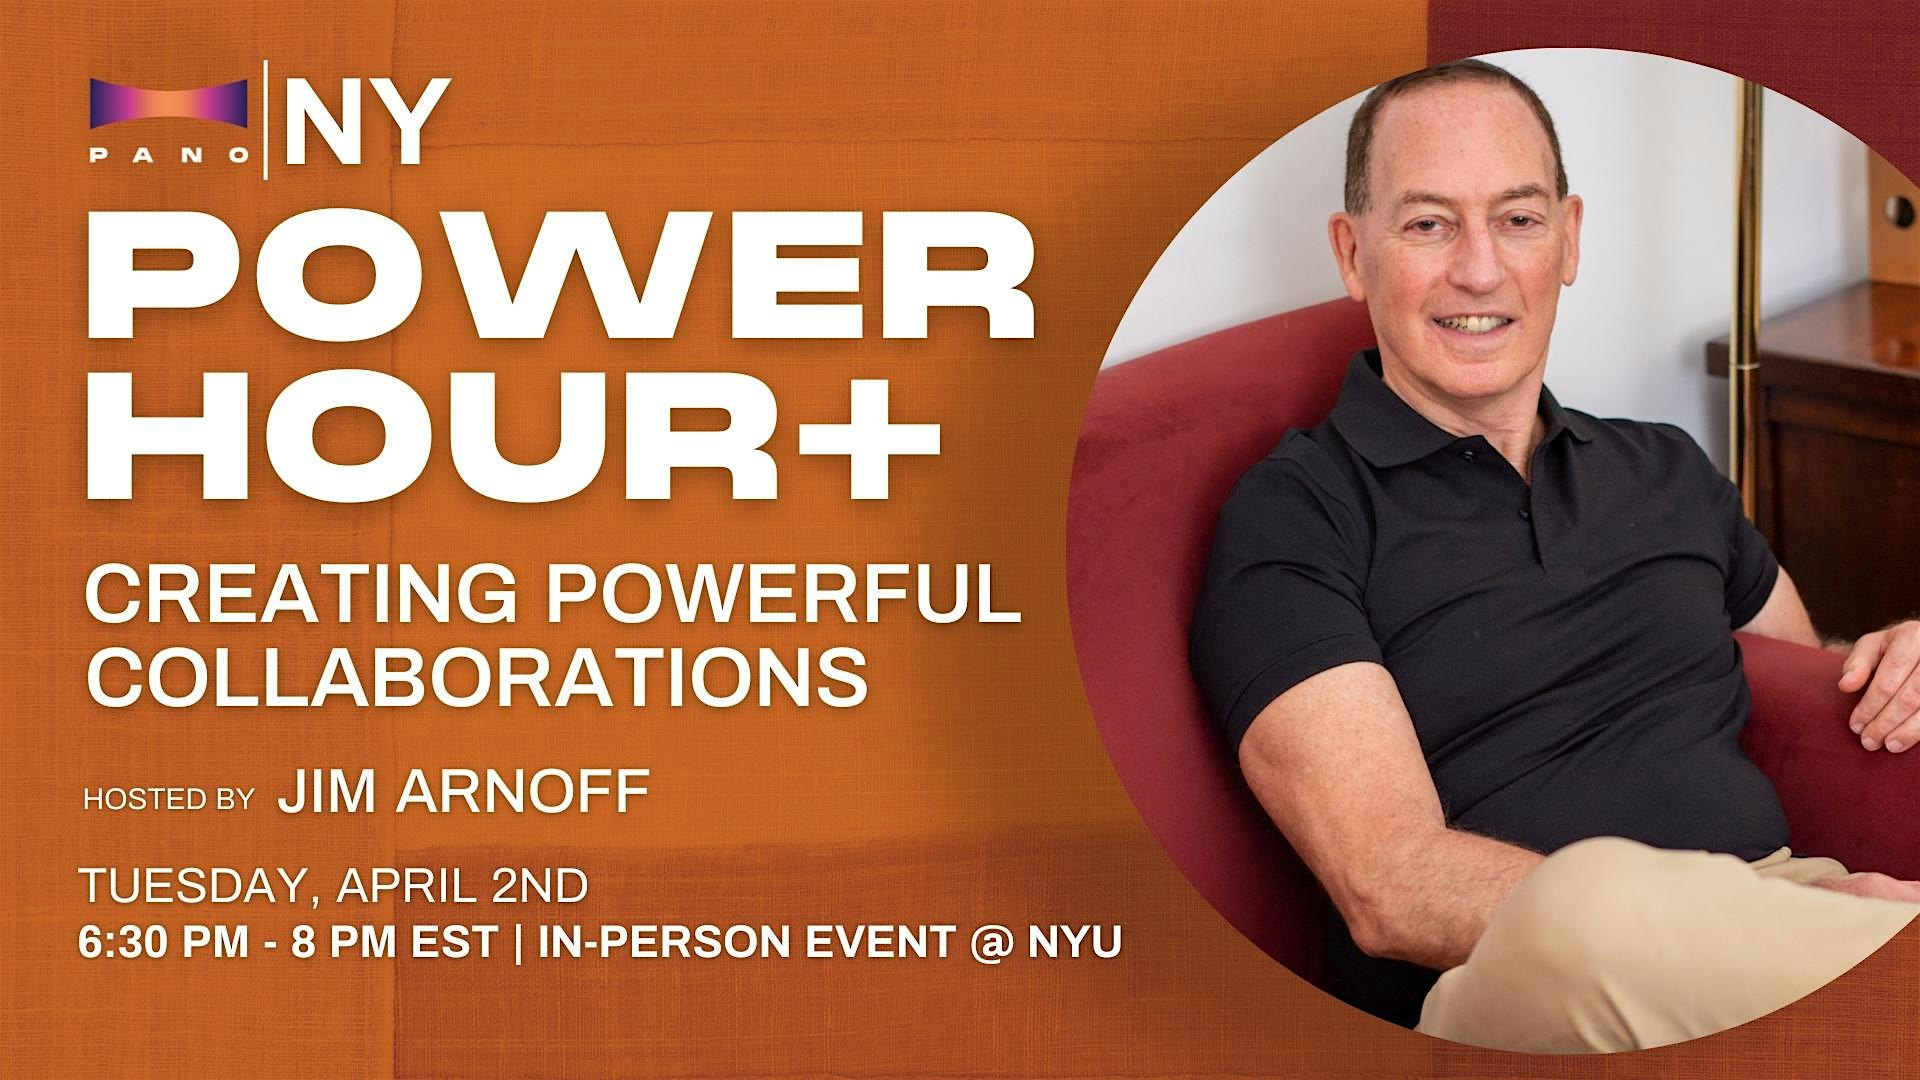 PANO NYC Power Hour: Creating Powerful Collaborations